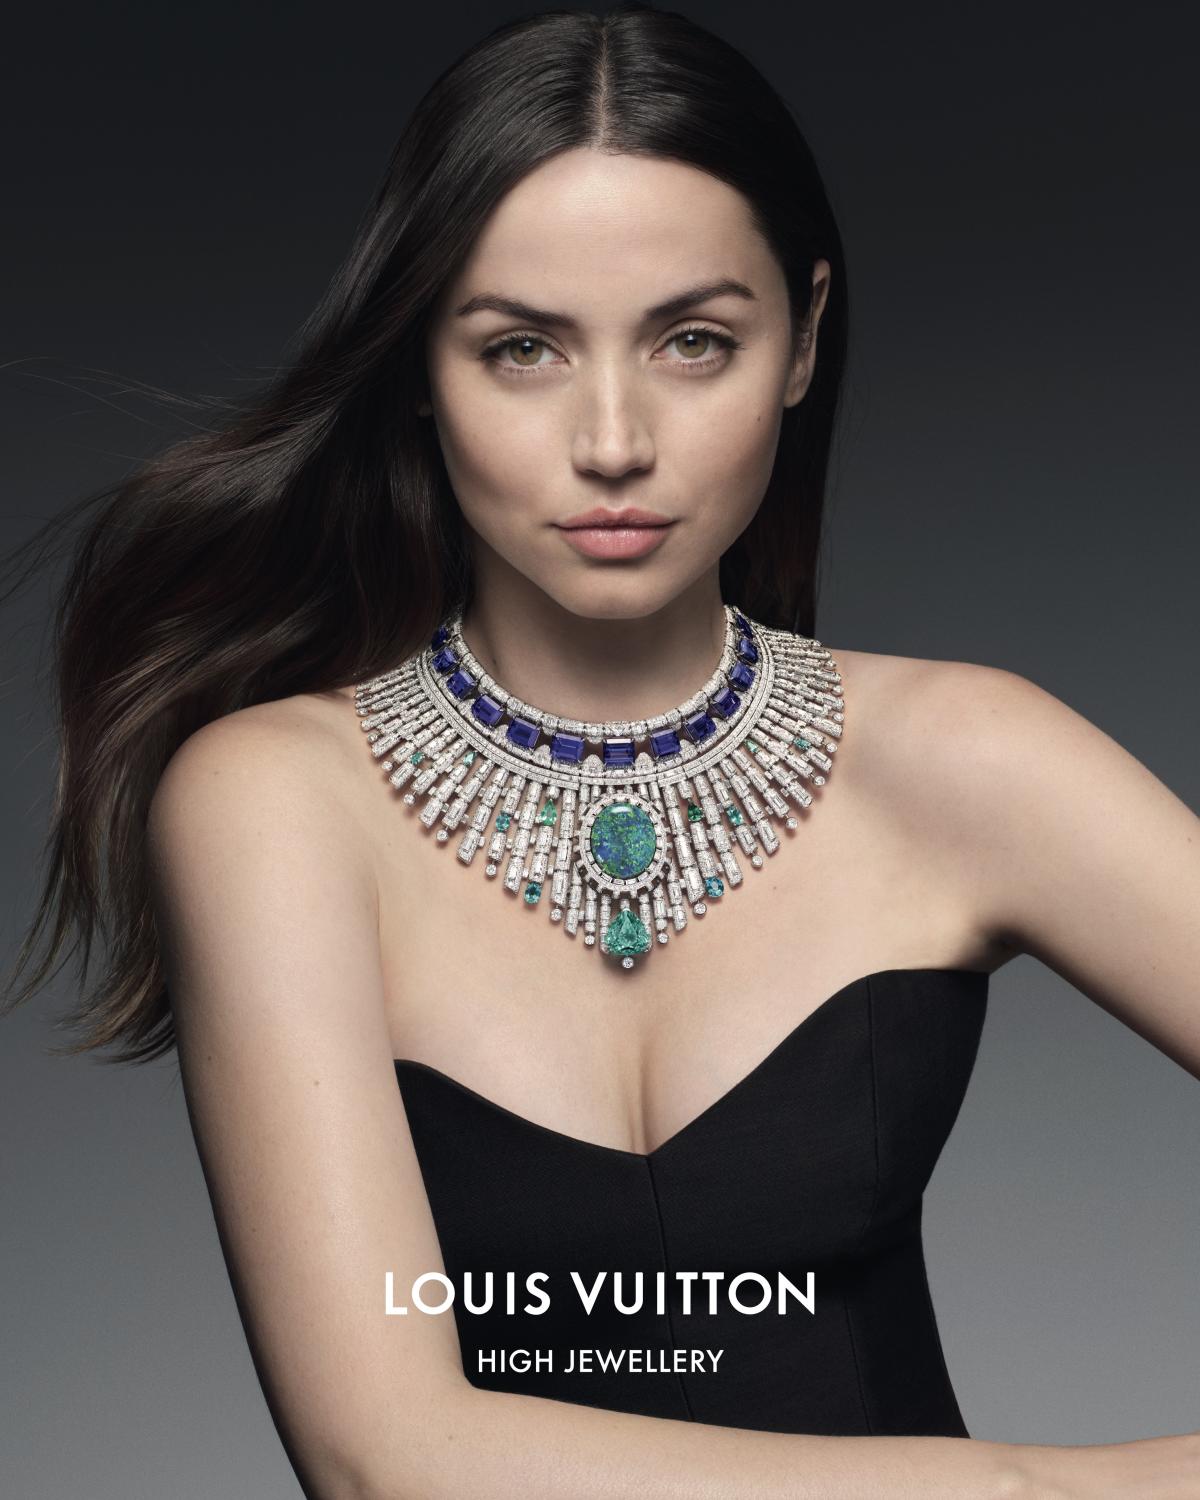 Greek princess in the new Louis Vuitton campaign